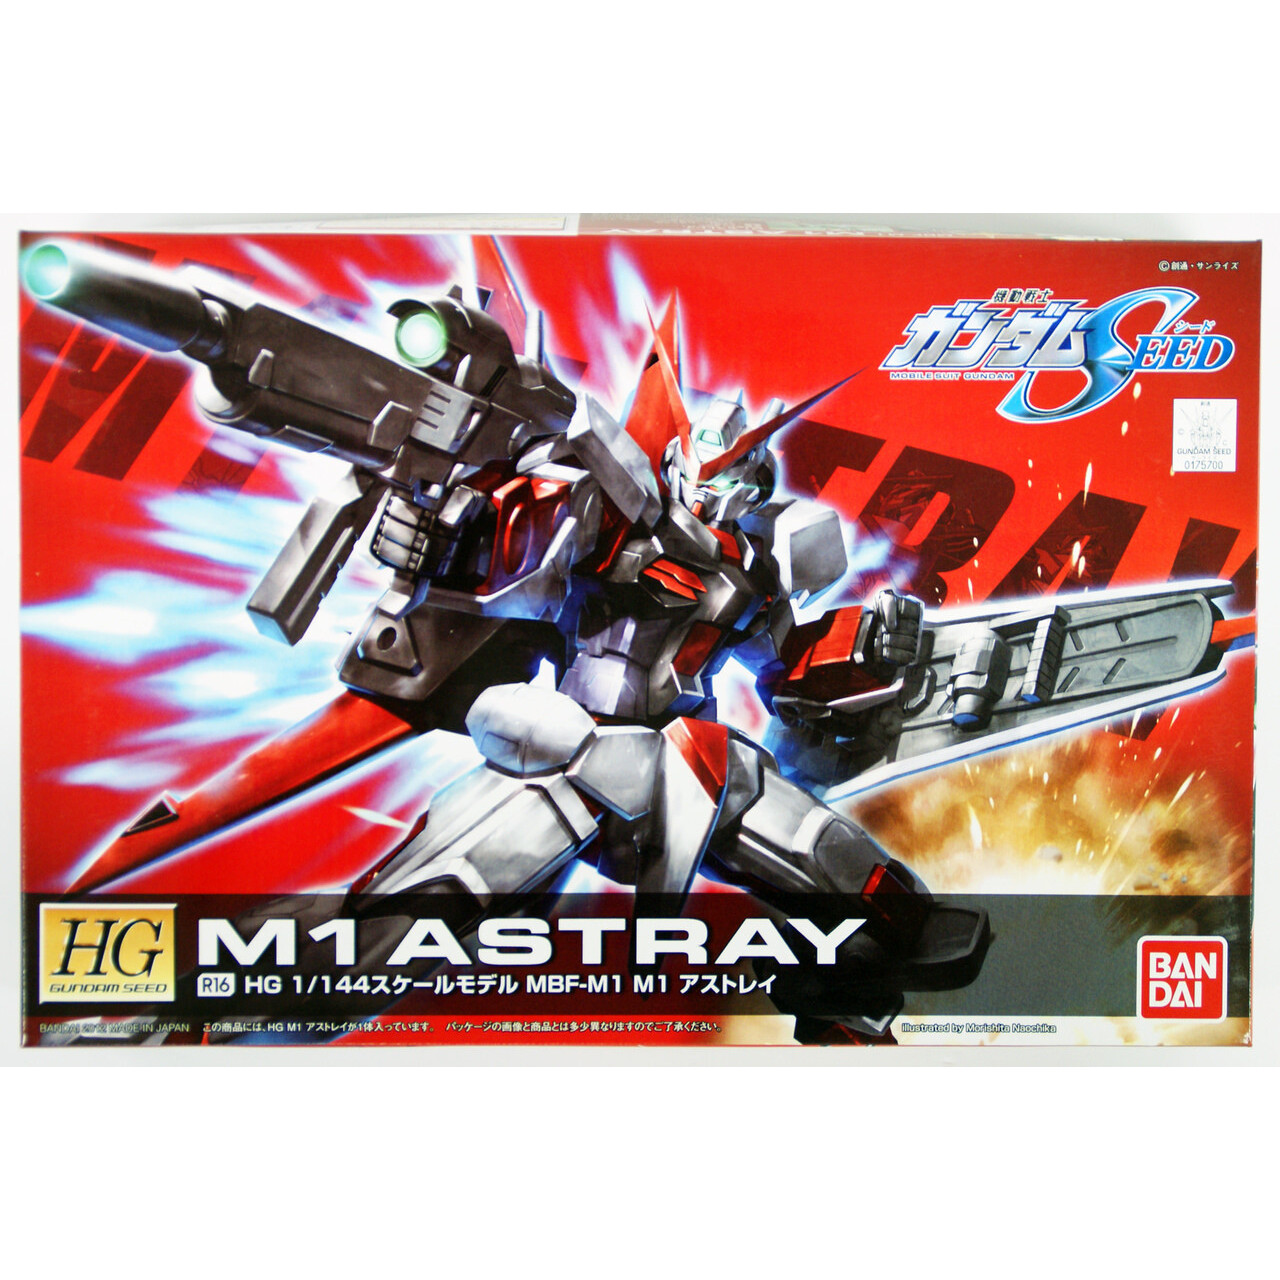 MBF-M1 M1 Astray Mobile Suit Gundam SEED HG 1144 Scale Model Kit (4)